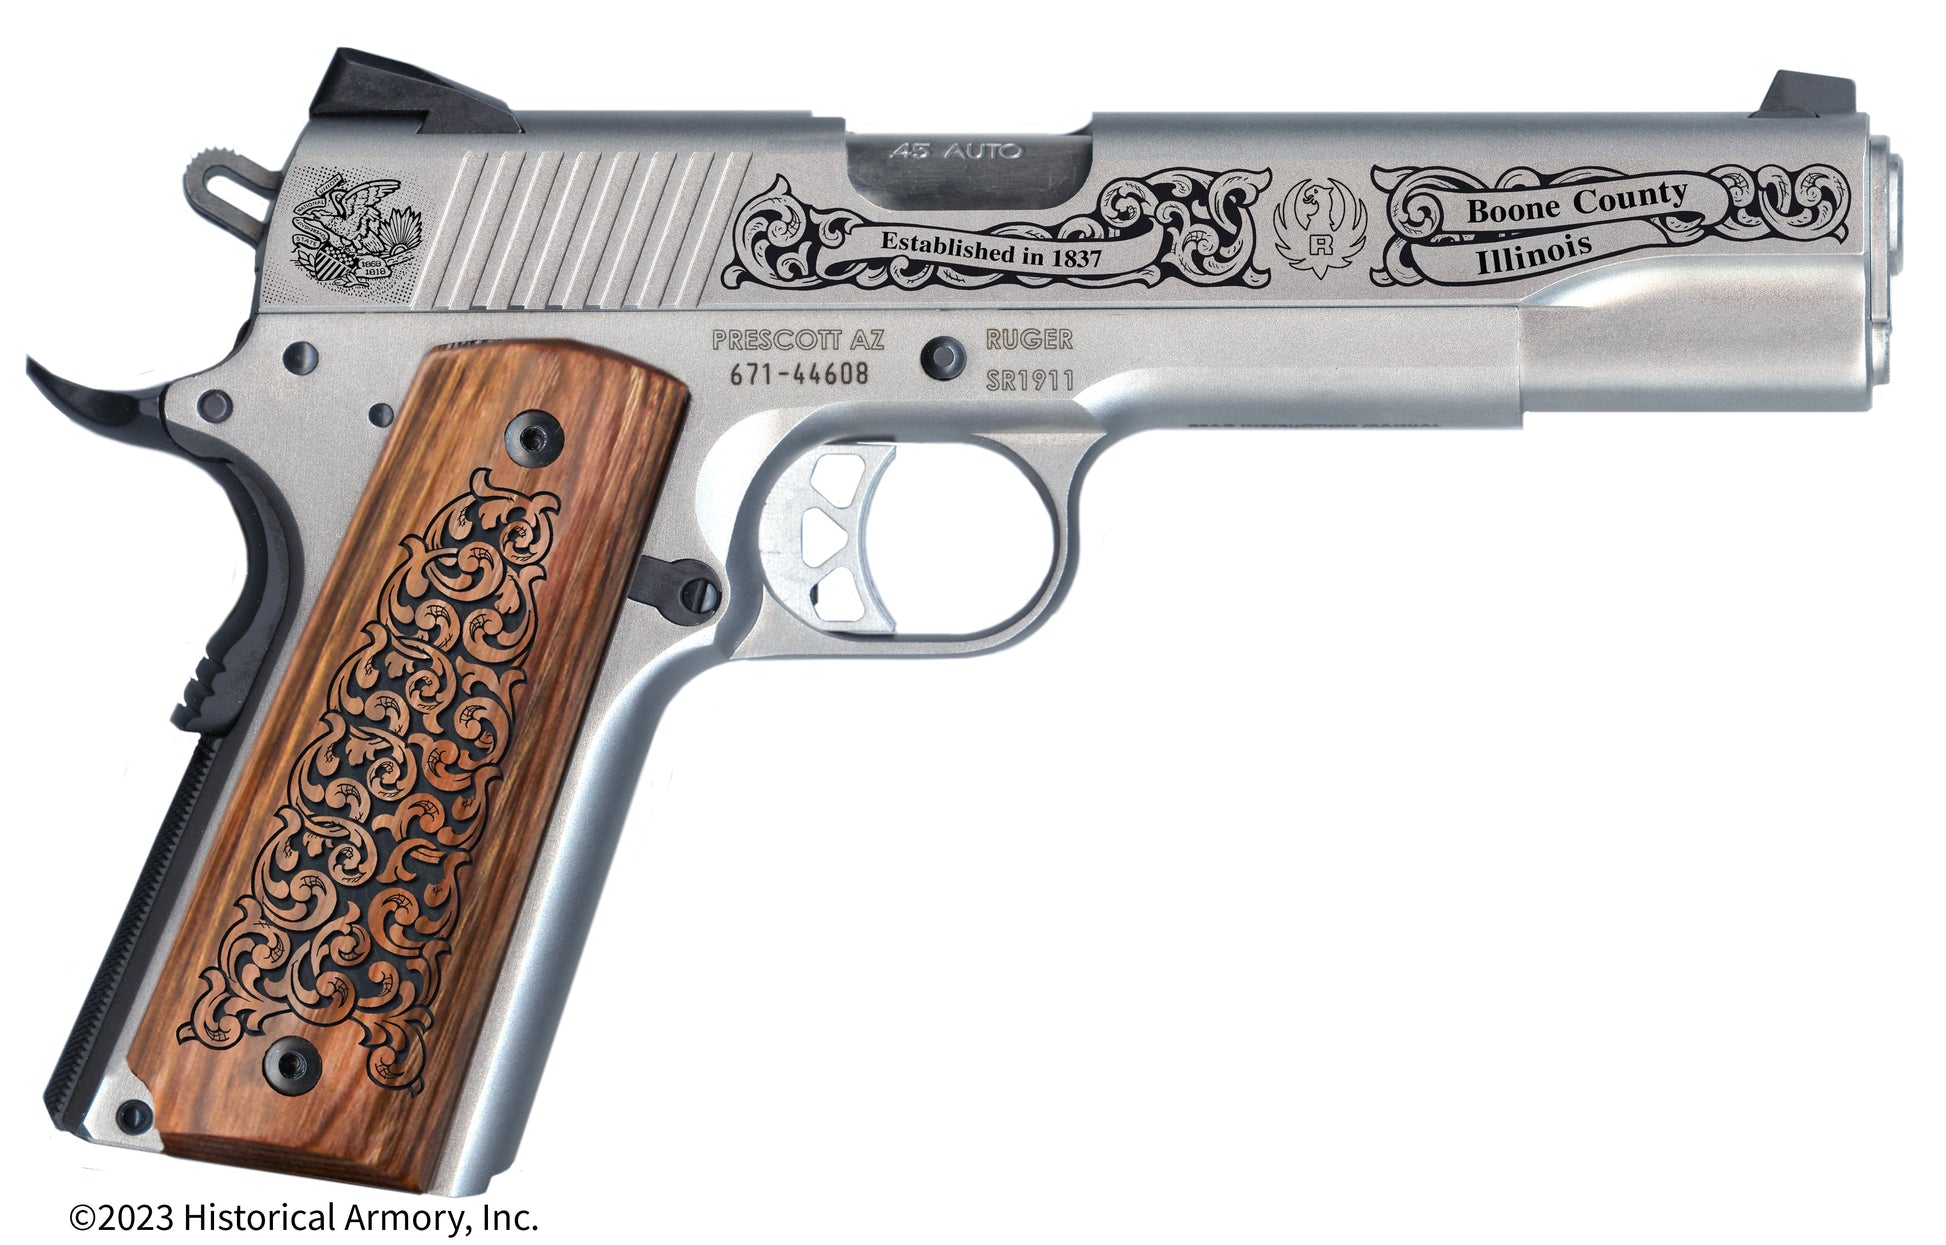 Boone County Illinois Engraved .45 Auto Ruger 1911